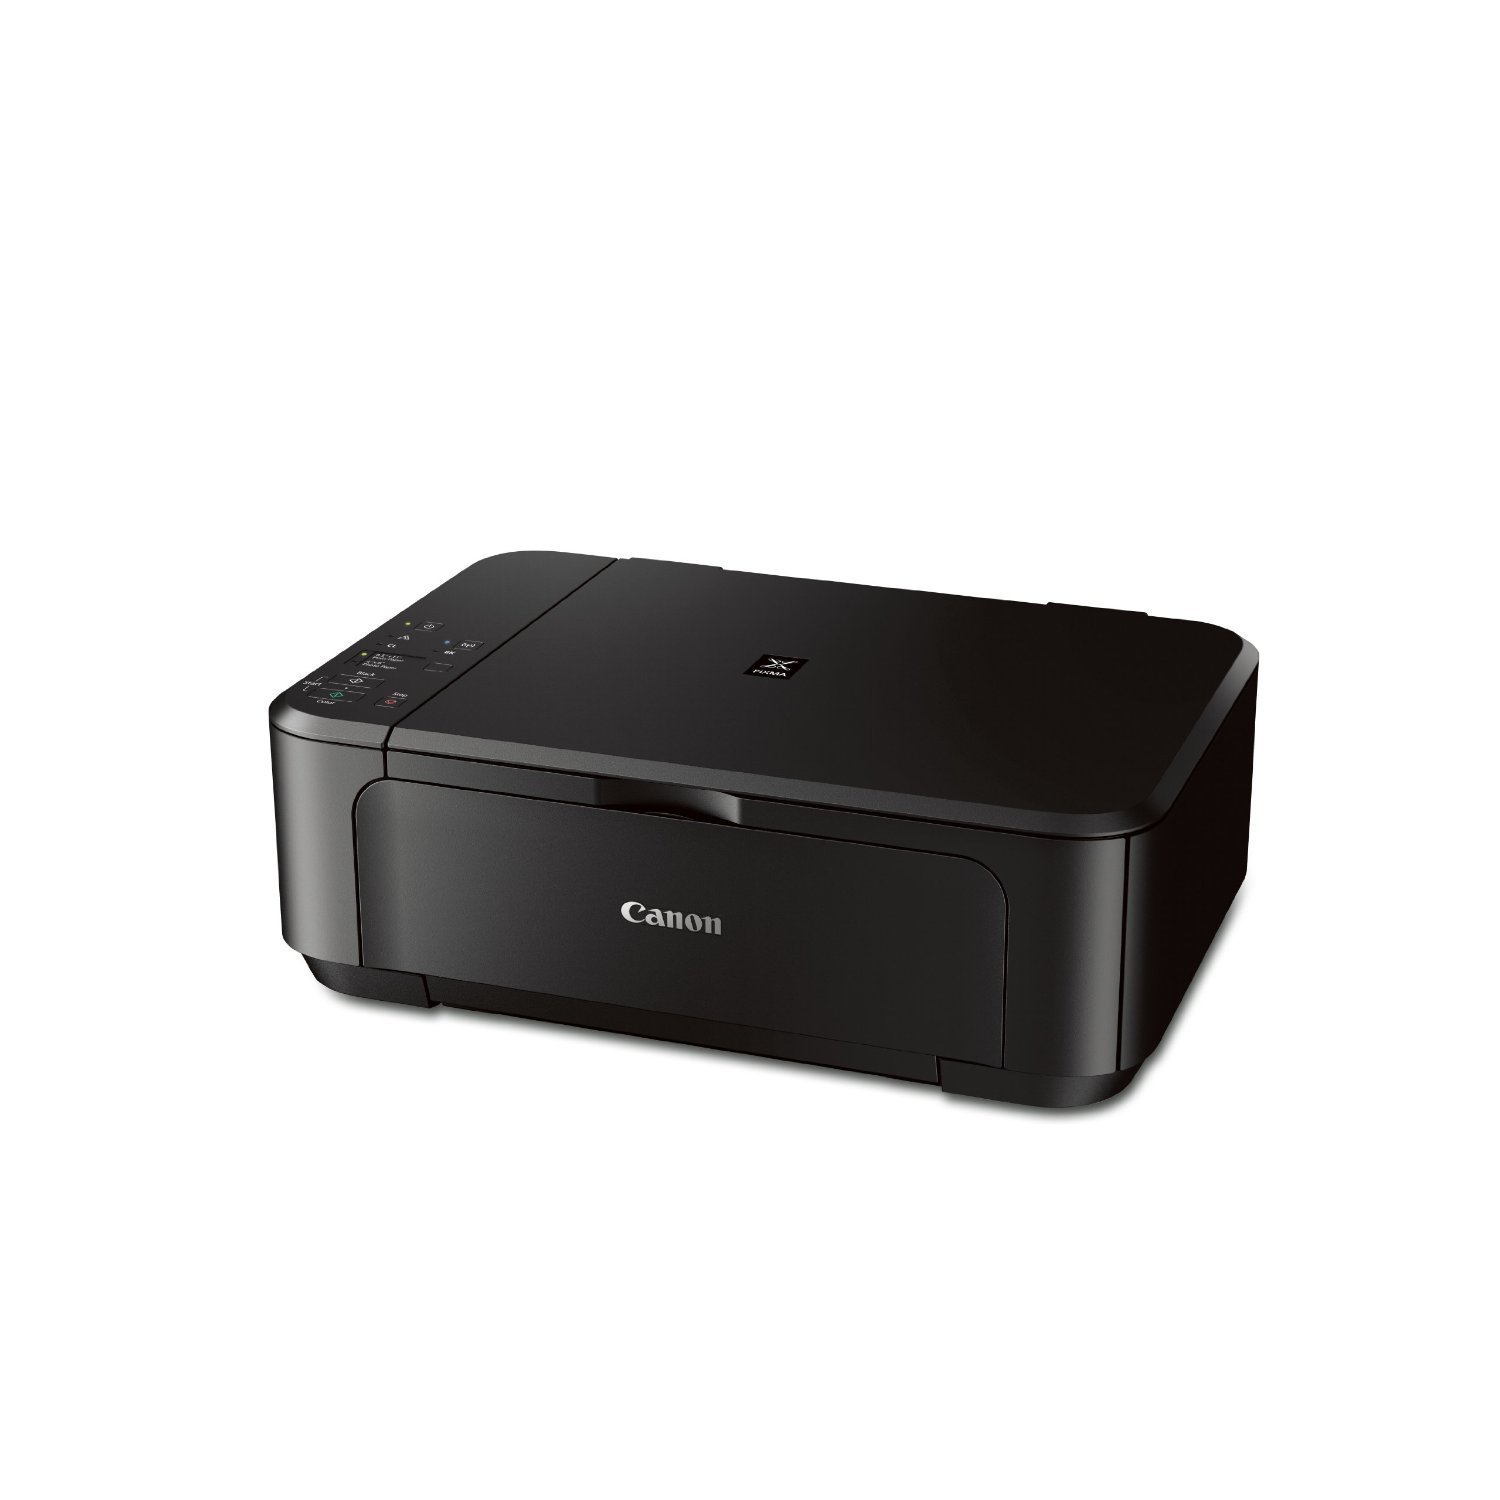 Canon Pixma Mg3520 Wireless All In One Color Inkjet Printercopierscanner N3 Free Image Download 7751